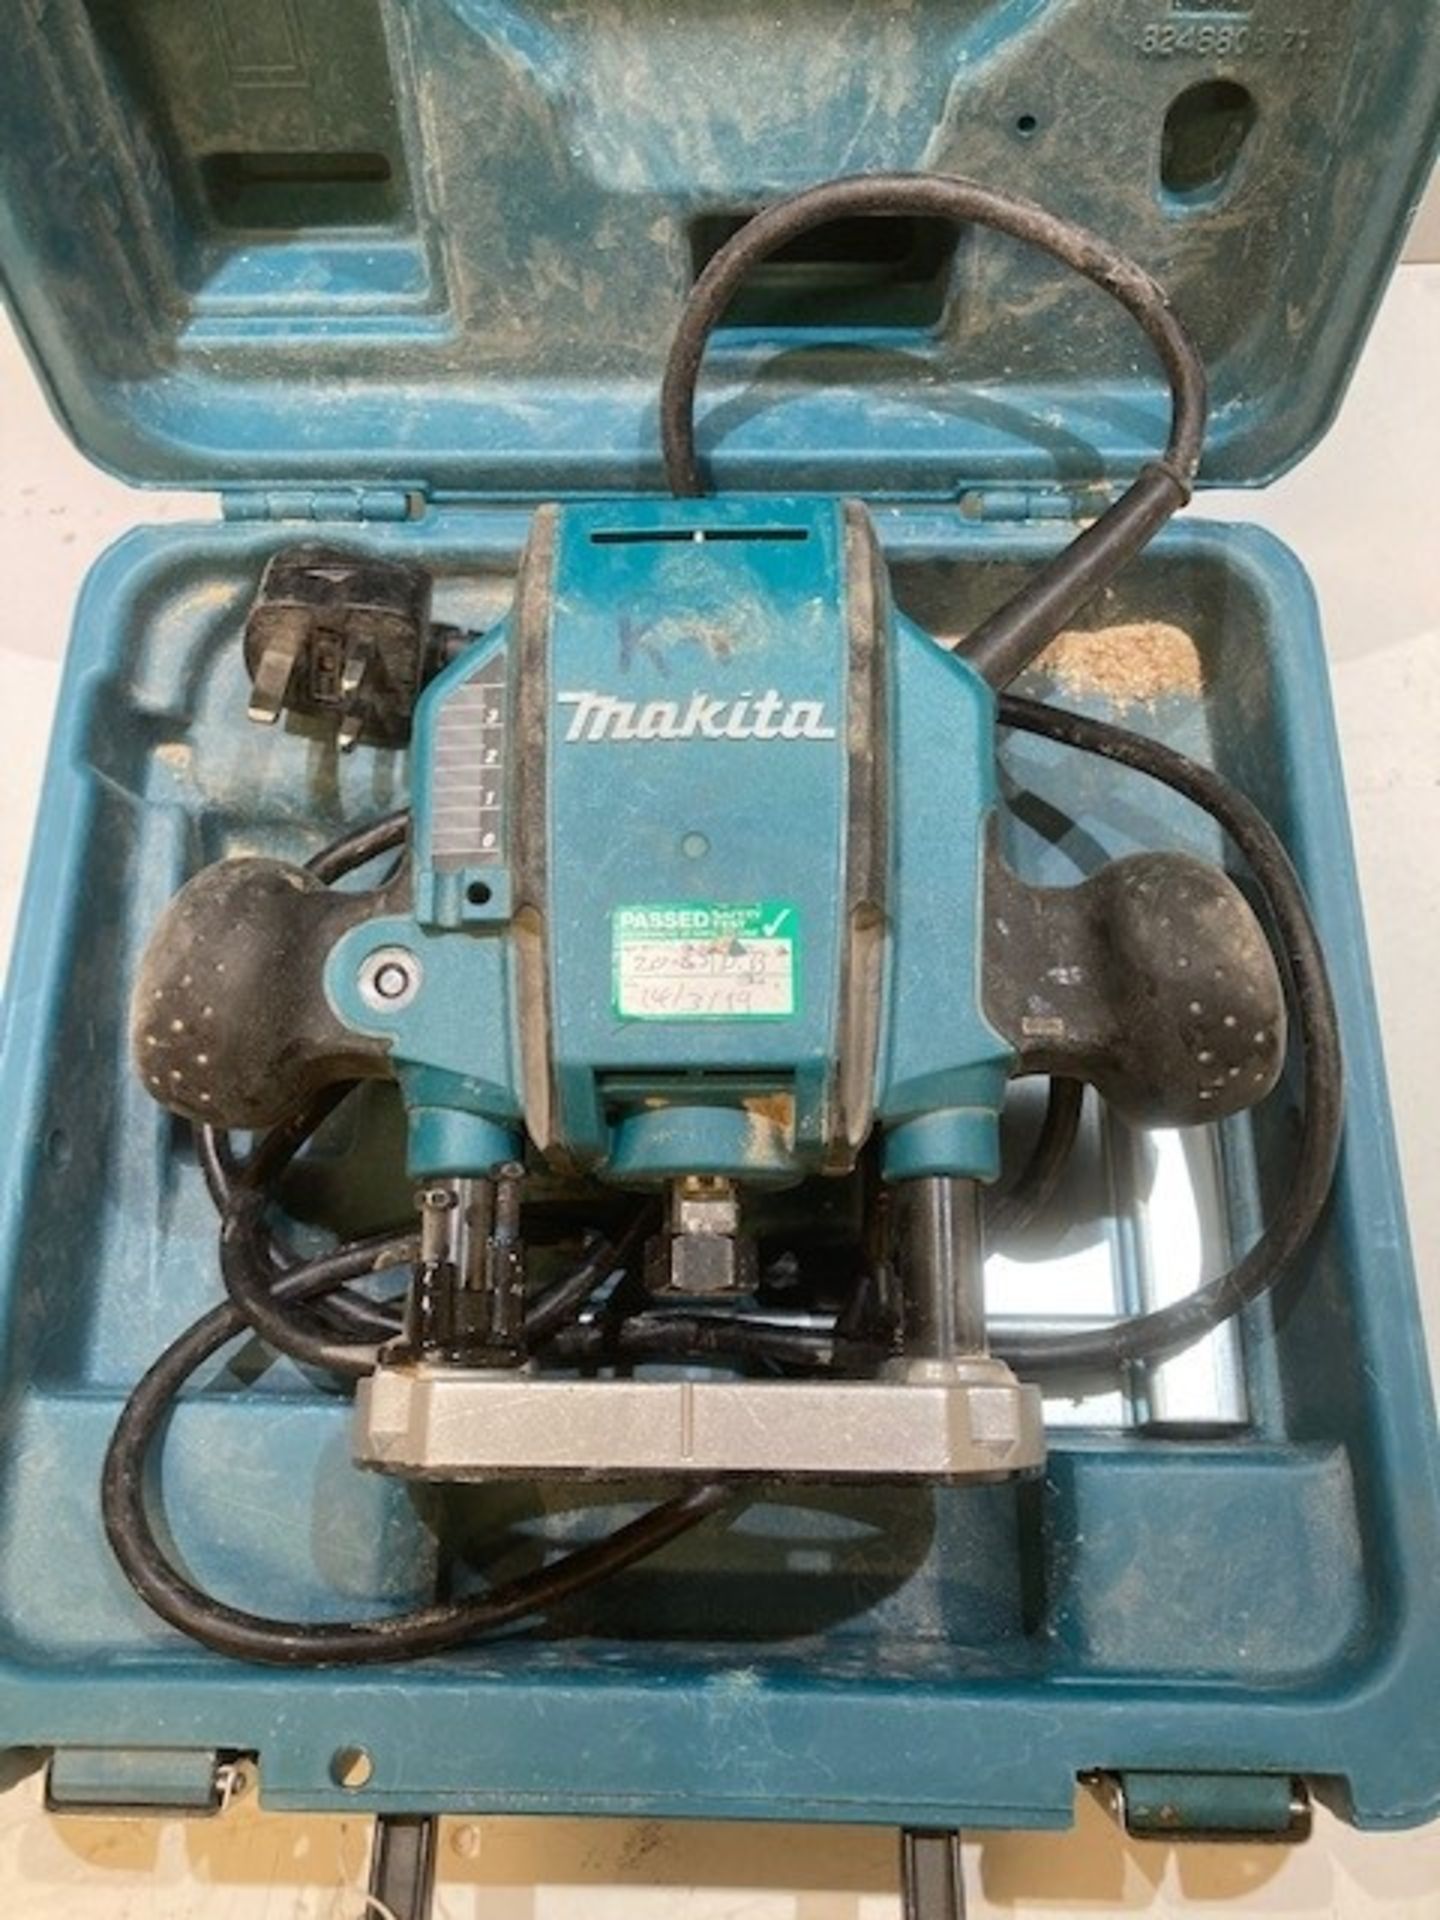 Makita RP0900 1/4" Plunge Router - Image 2 of 4